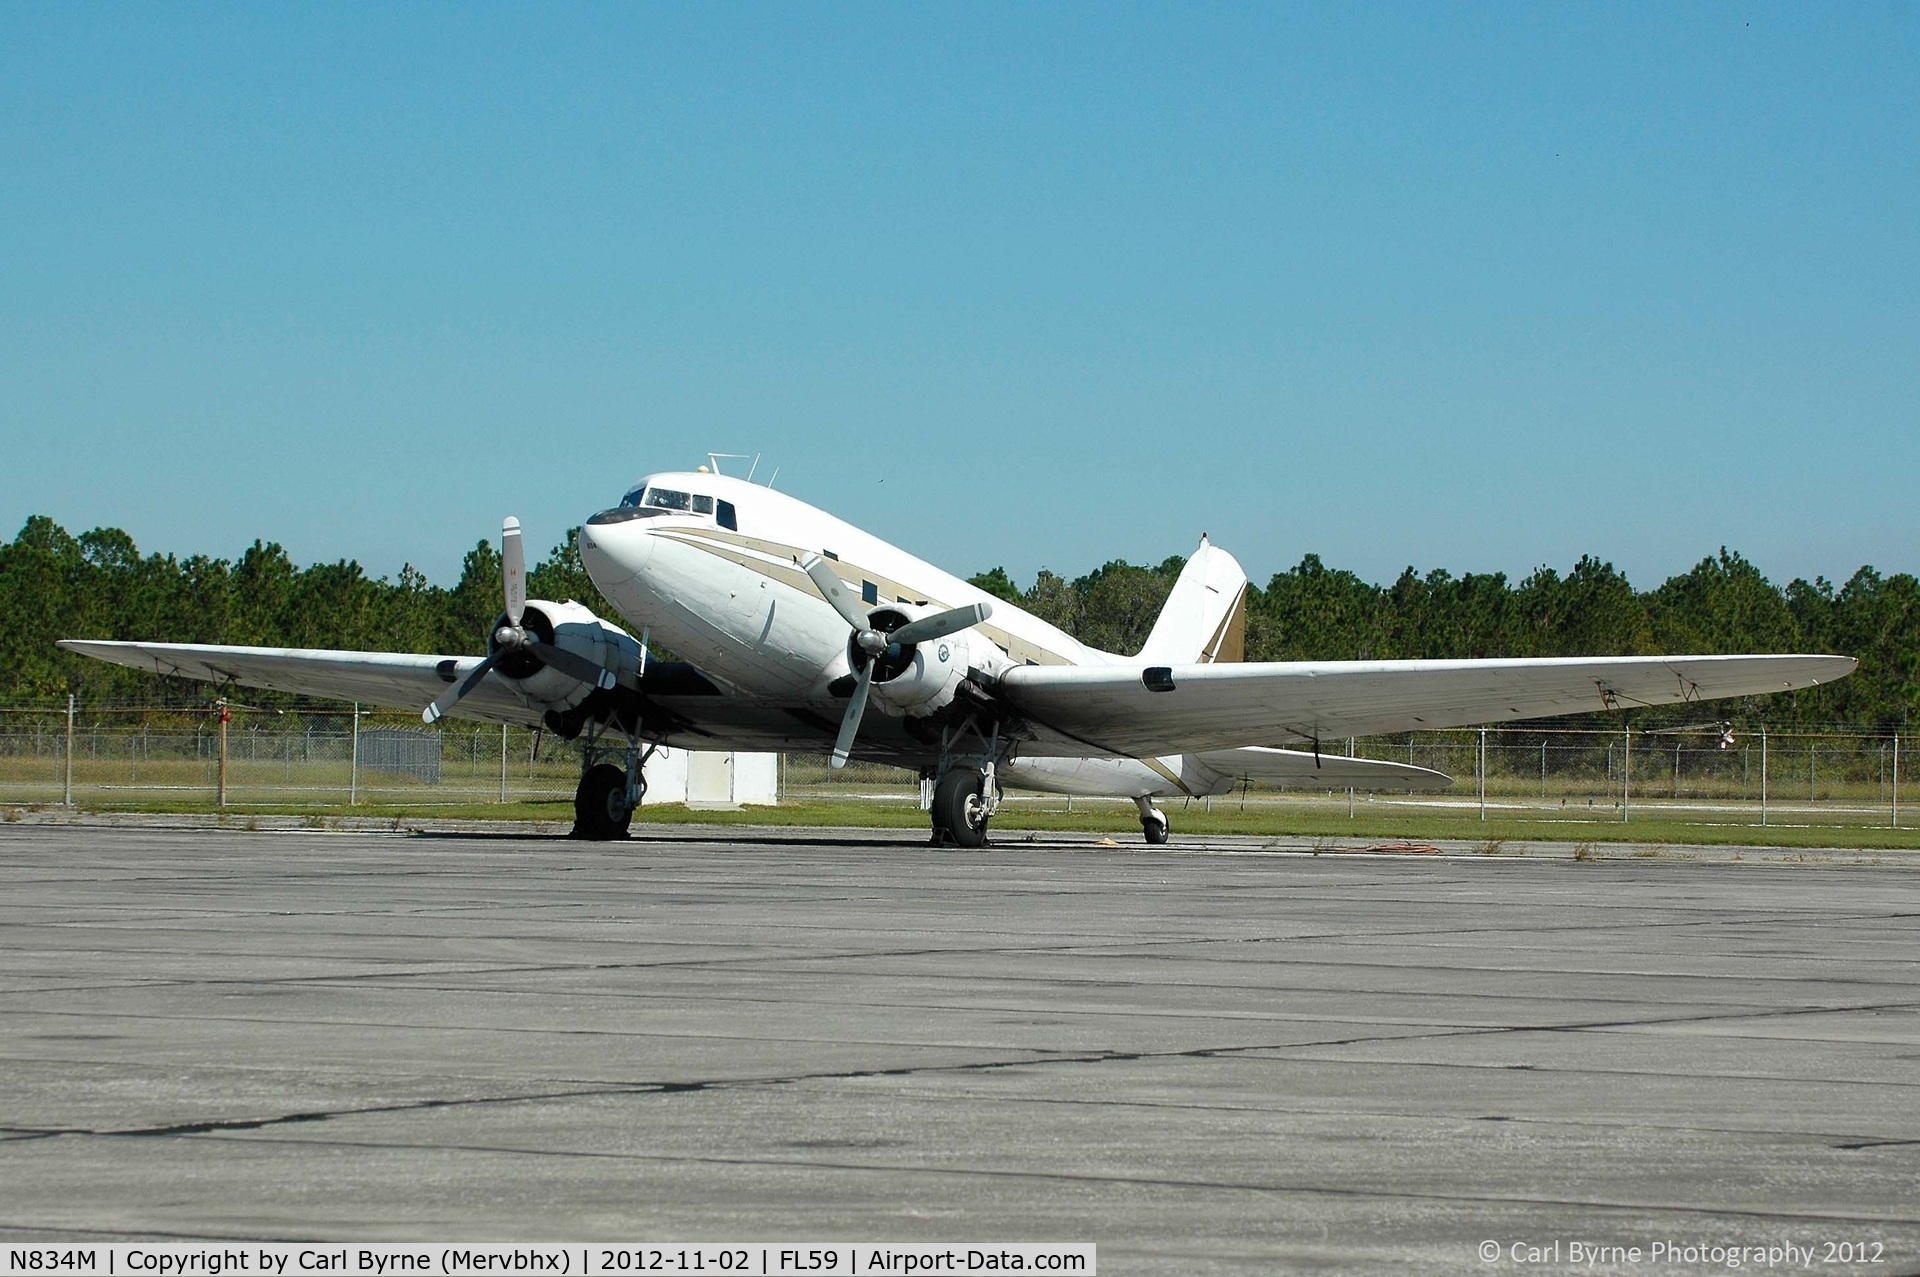 N834M, 1943 Douglas C-47 C/N 43-48950, One of Lee County's Mosquito Control aircraft.